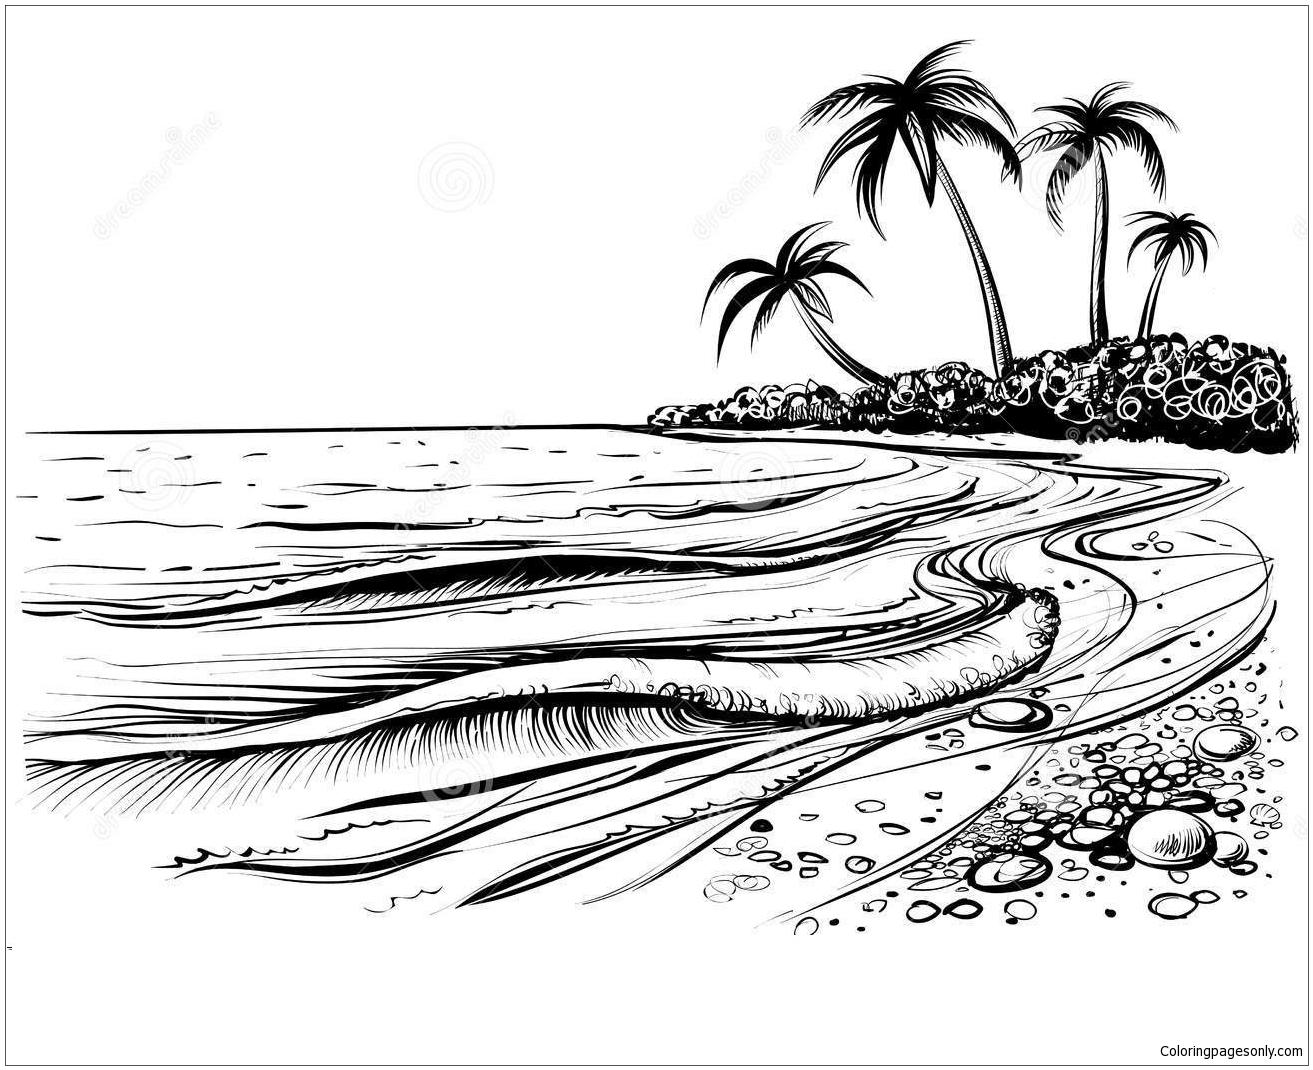 Sea Beach With Waves Coloring Page - Free Coloring Pages Online